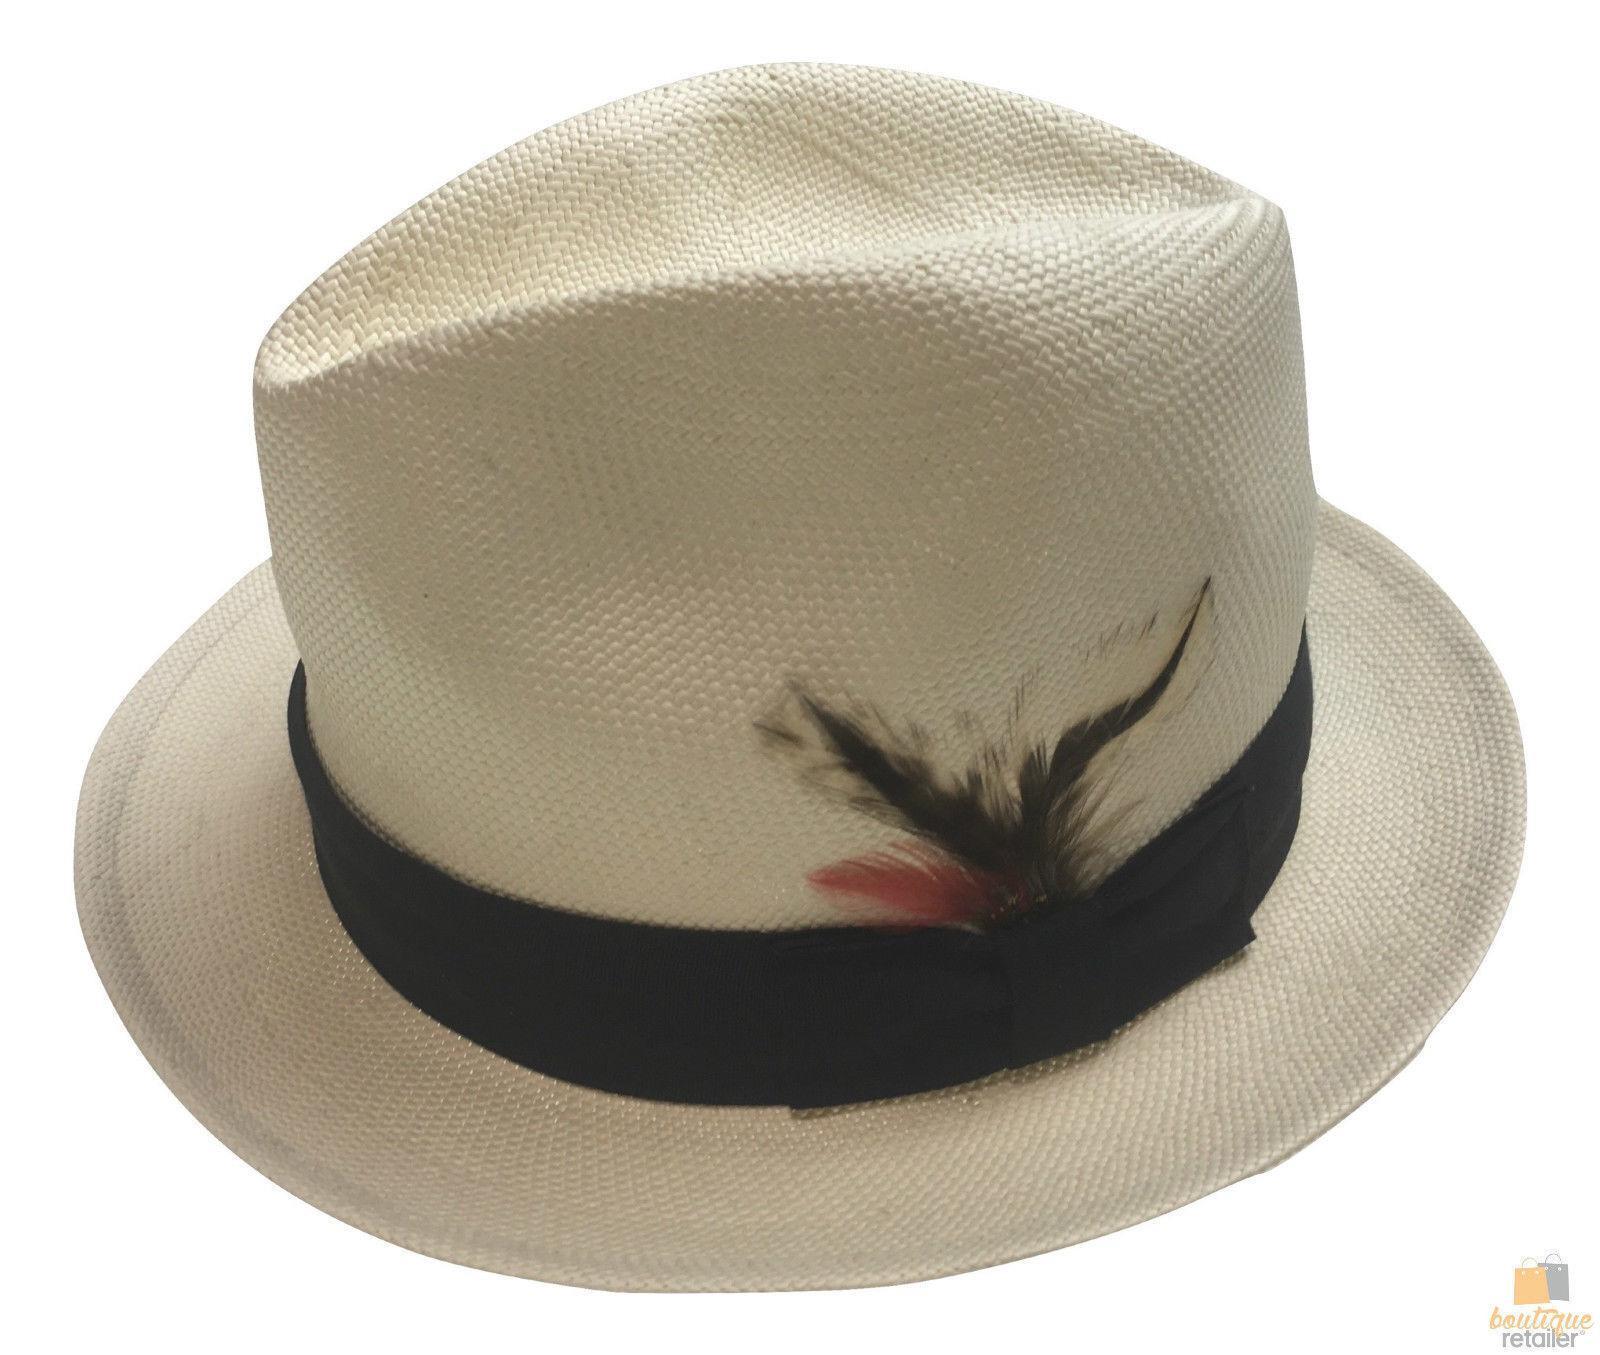 Small Brim Classic Trilby HAT with Feather Fedora Sun UV MADE in USA KS-10 - L (7 1/4 - 7 3/8"")